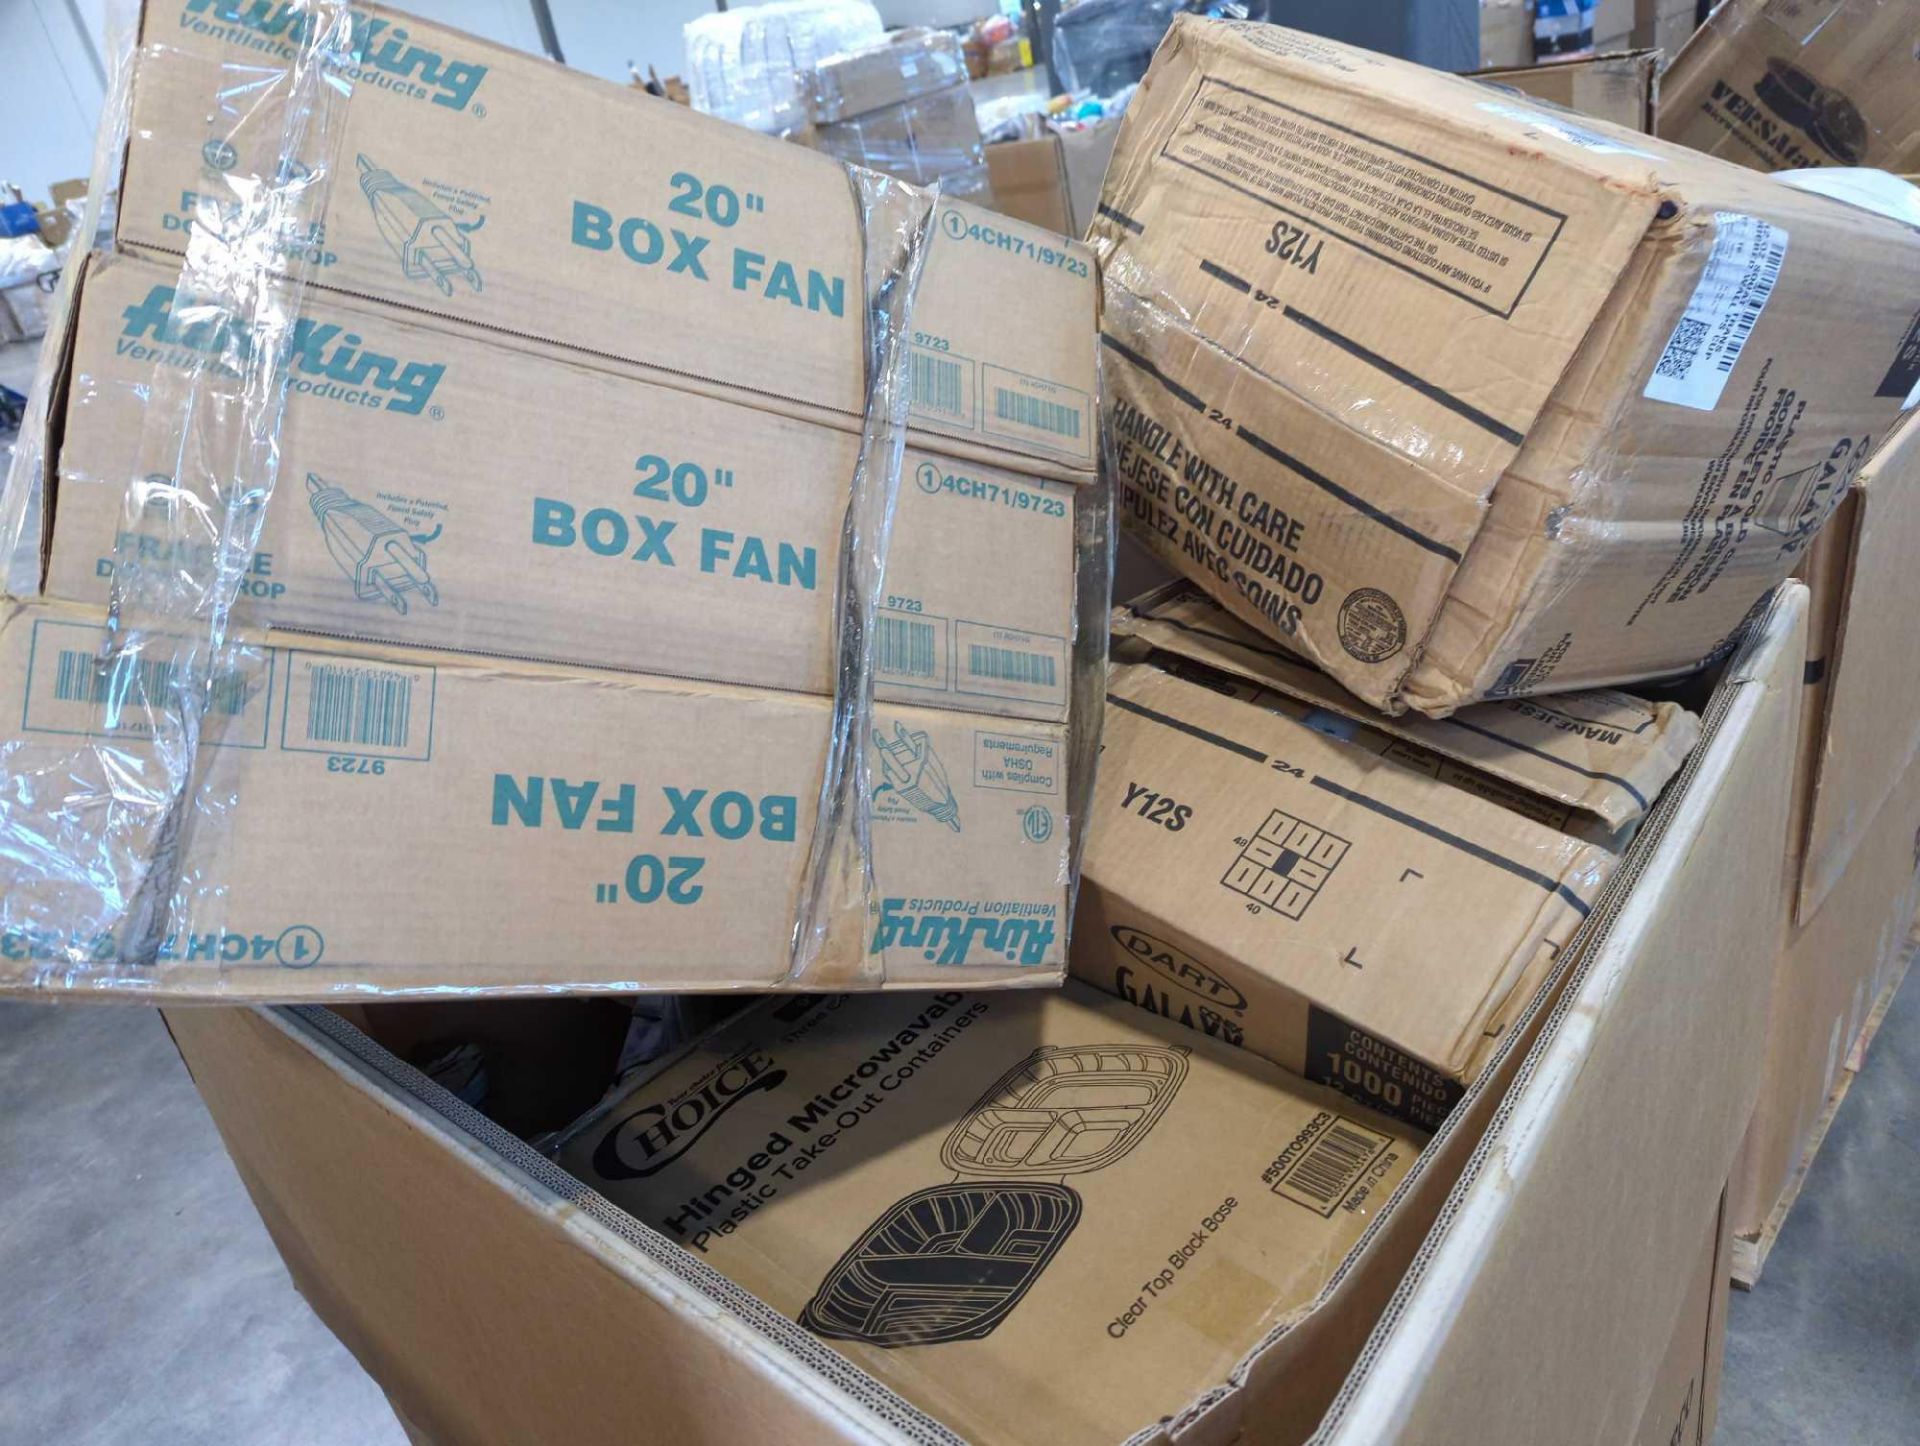 King Air box fans, and more - Image 11 of 12